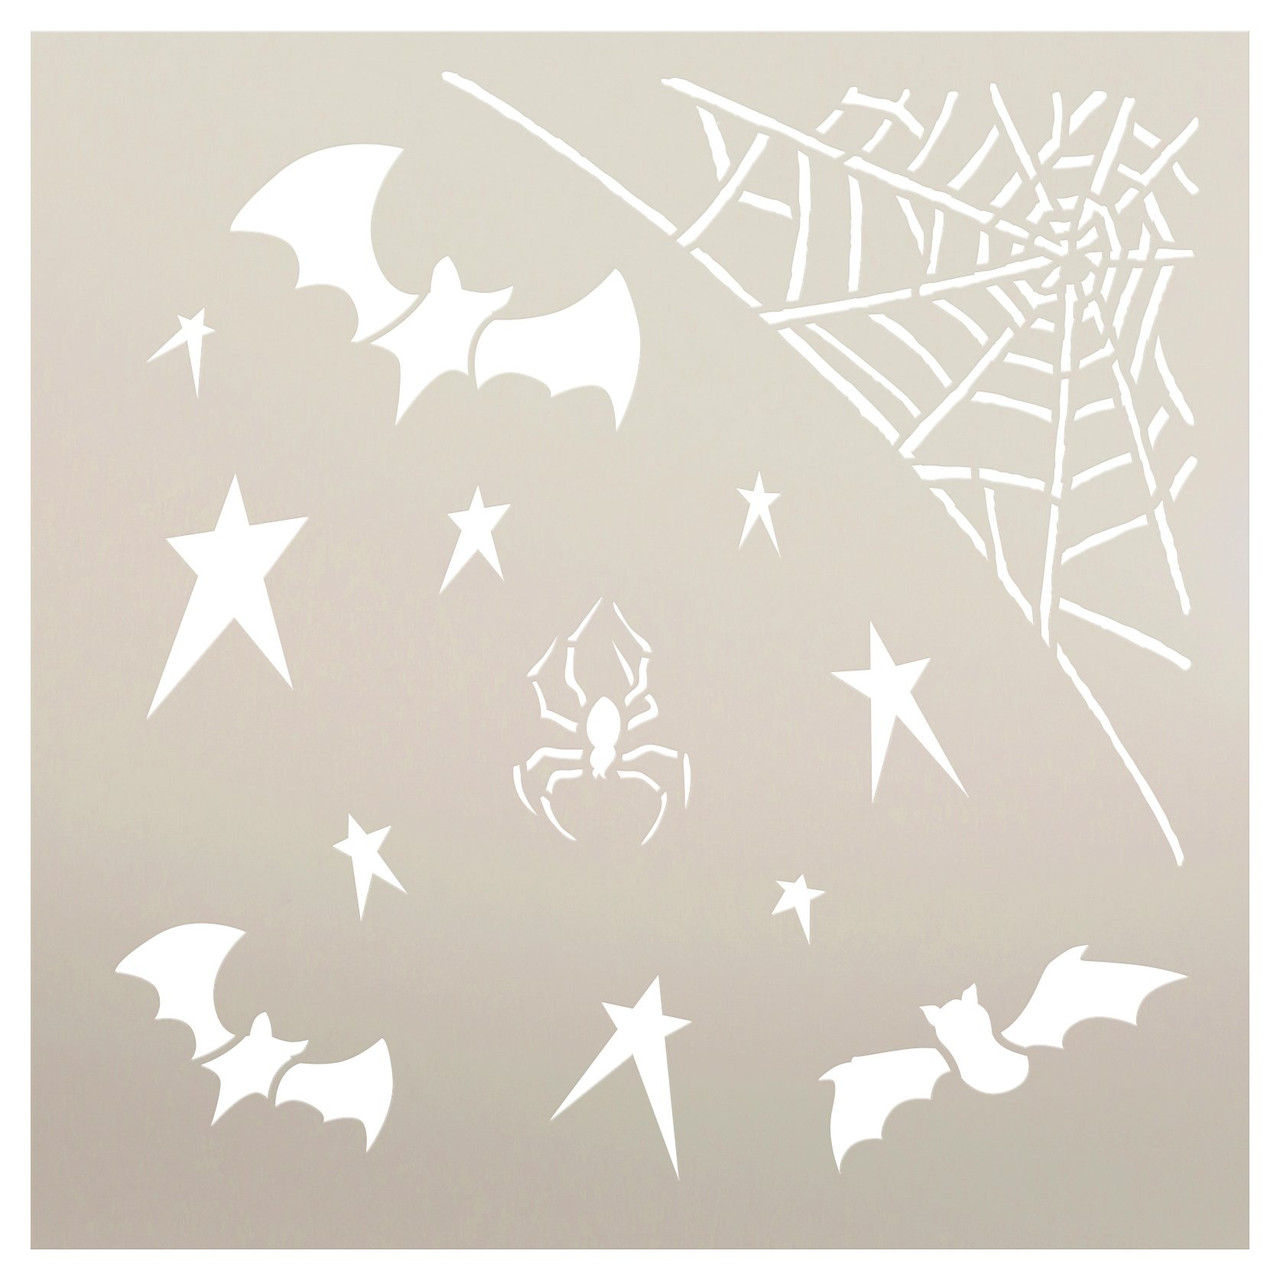 Spider Web & Bats Embellishment Stencil by StudioR12 - Select Size - USA Made - DIY Halloween Decor | Reusable Template for Crafting & Painting